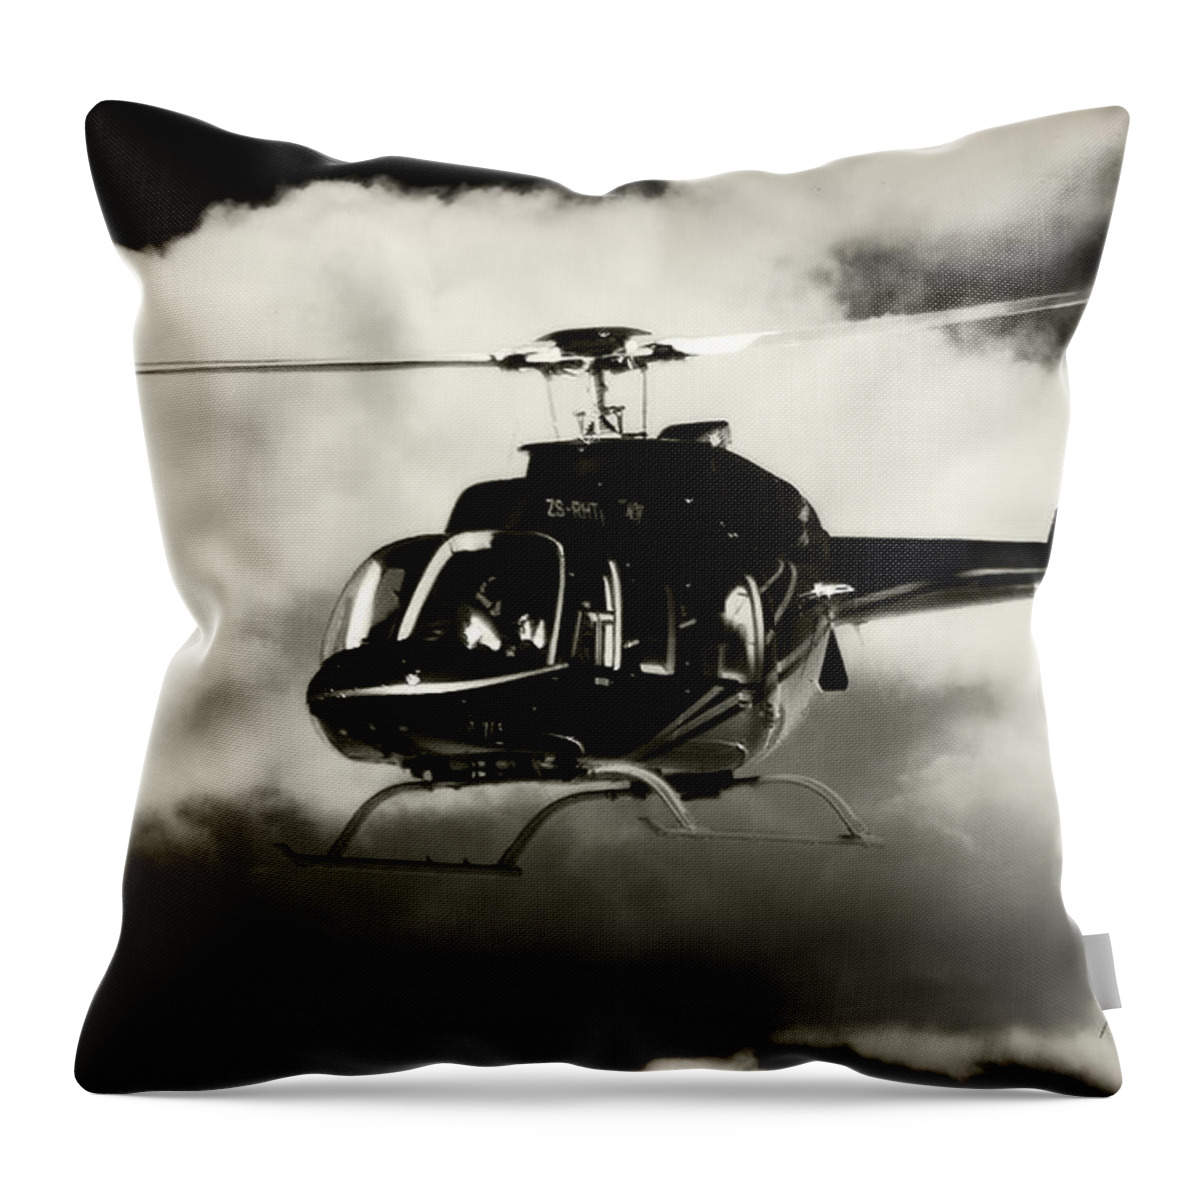 Bell 407 Throw Pillow featuring the photograph Black Bell by Paul Job